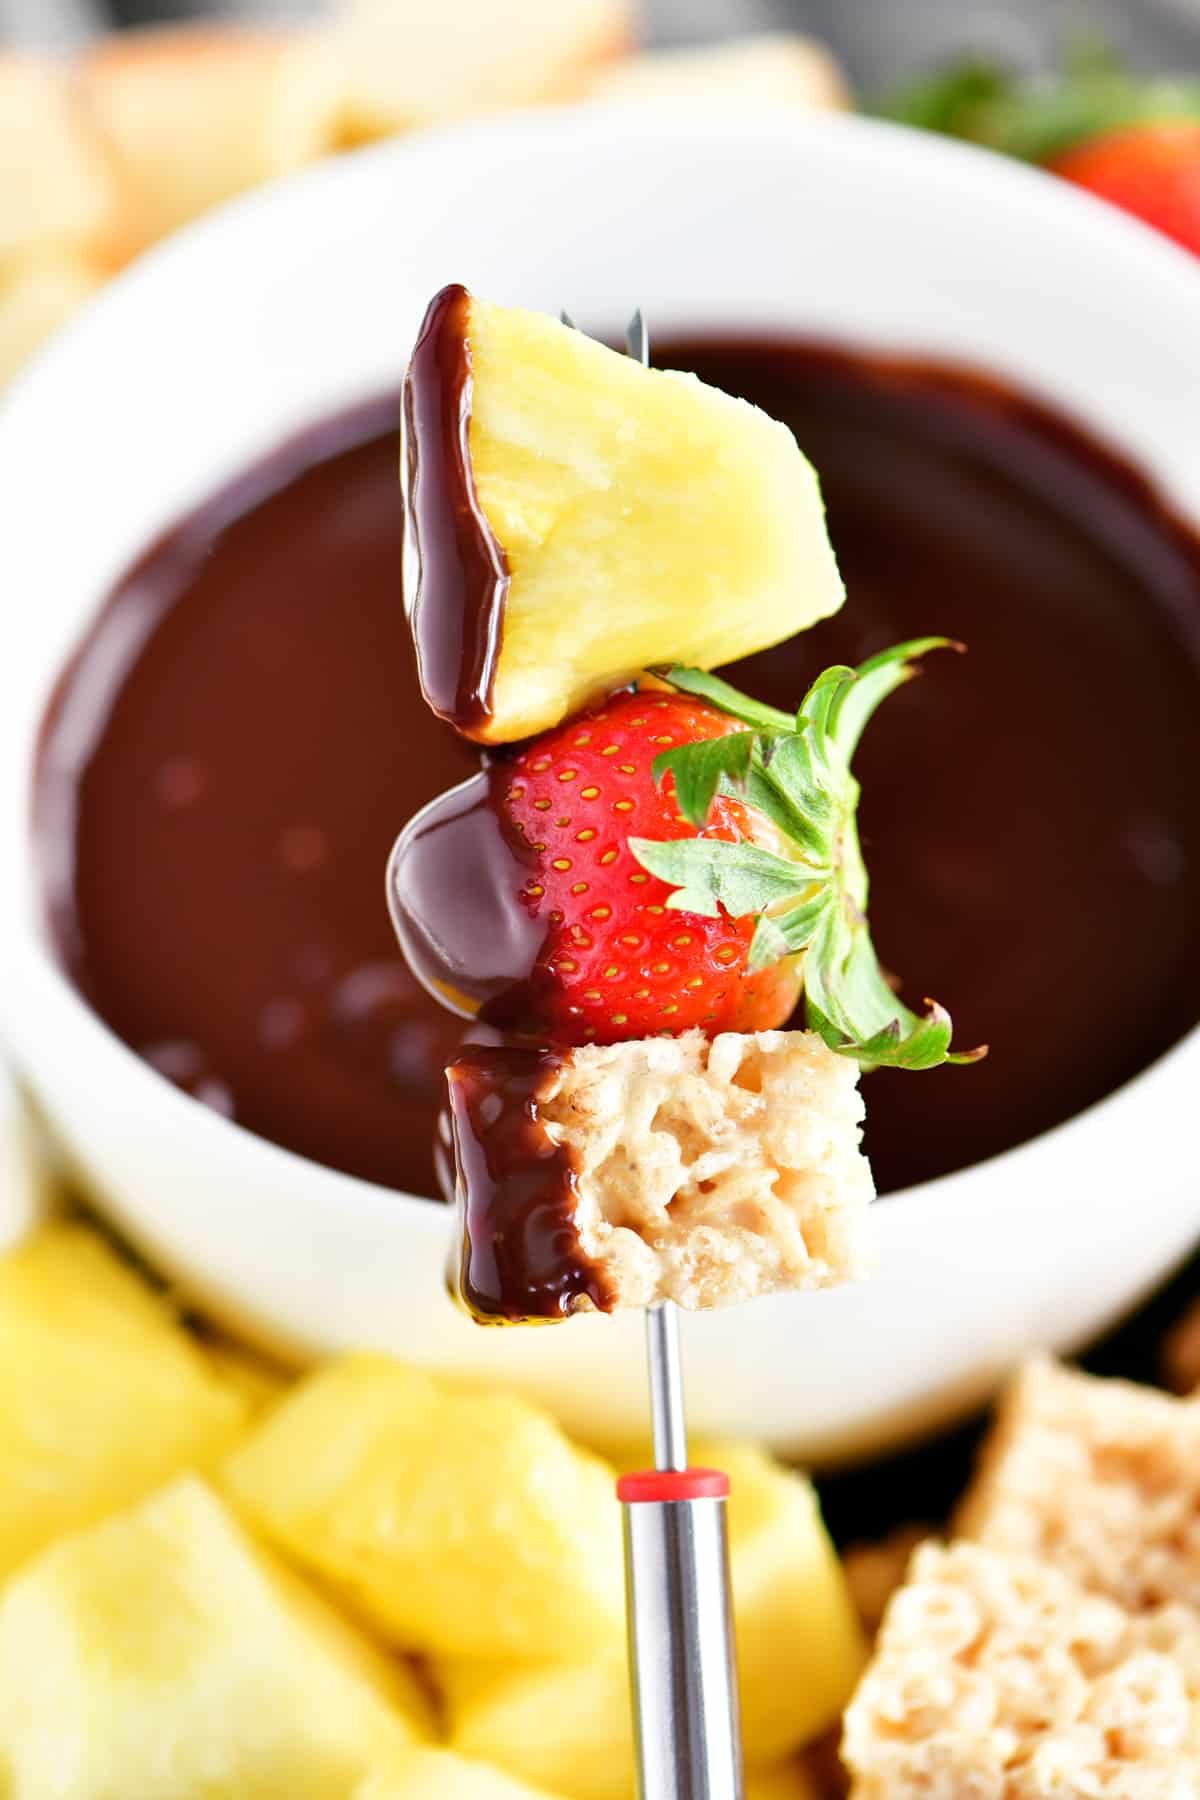 A rice crispy square, strawberry and pineapple with chocolate fondue.